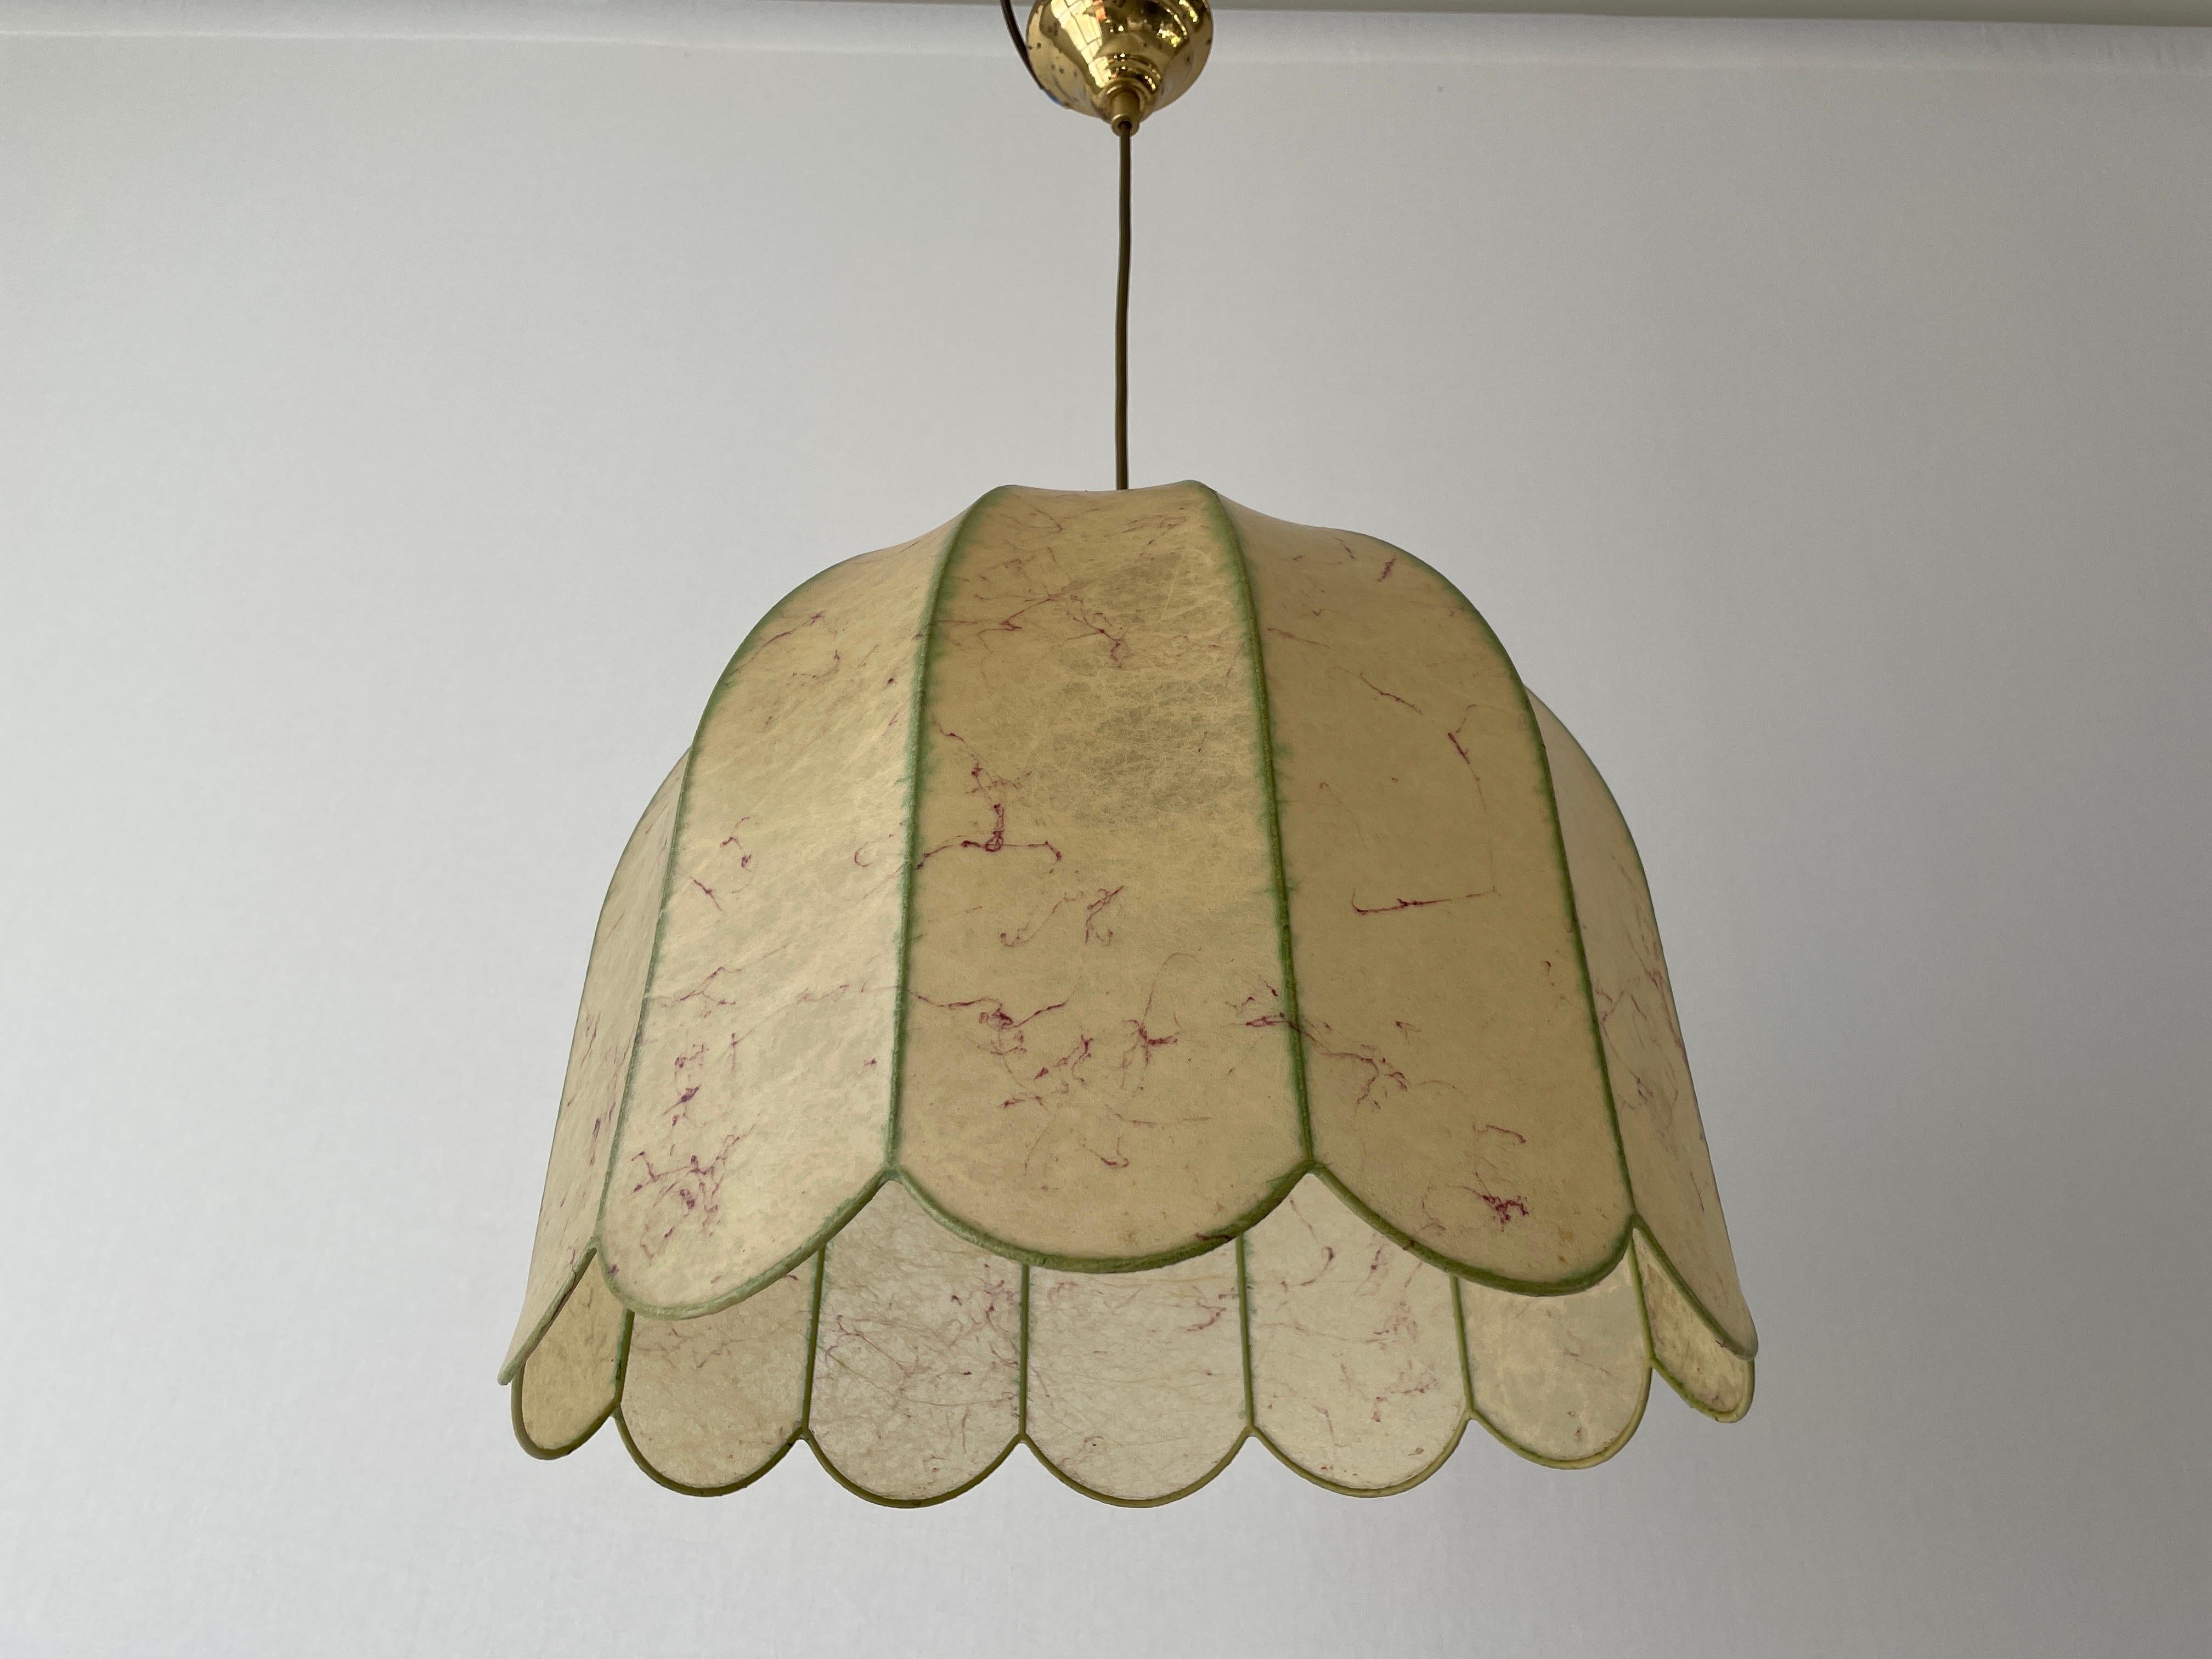 Resin Flower Design Cocoon Pendant Lamp by Goldkant, 1960s, Germany